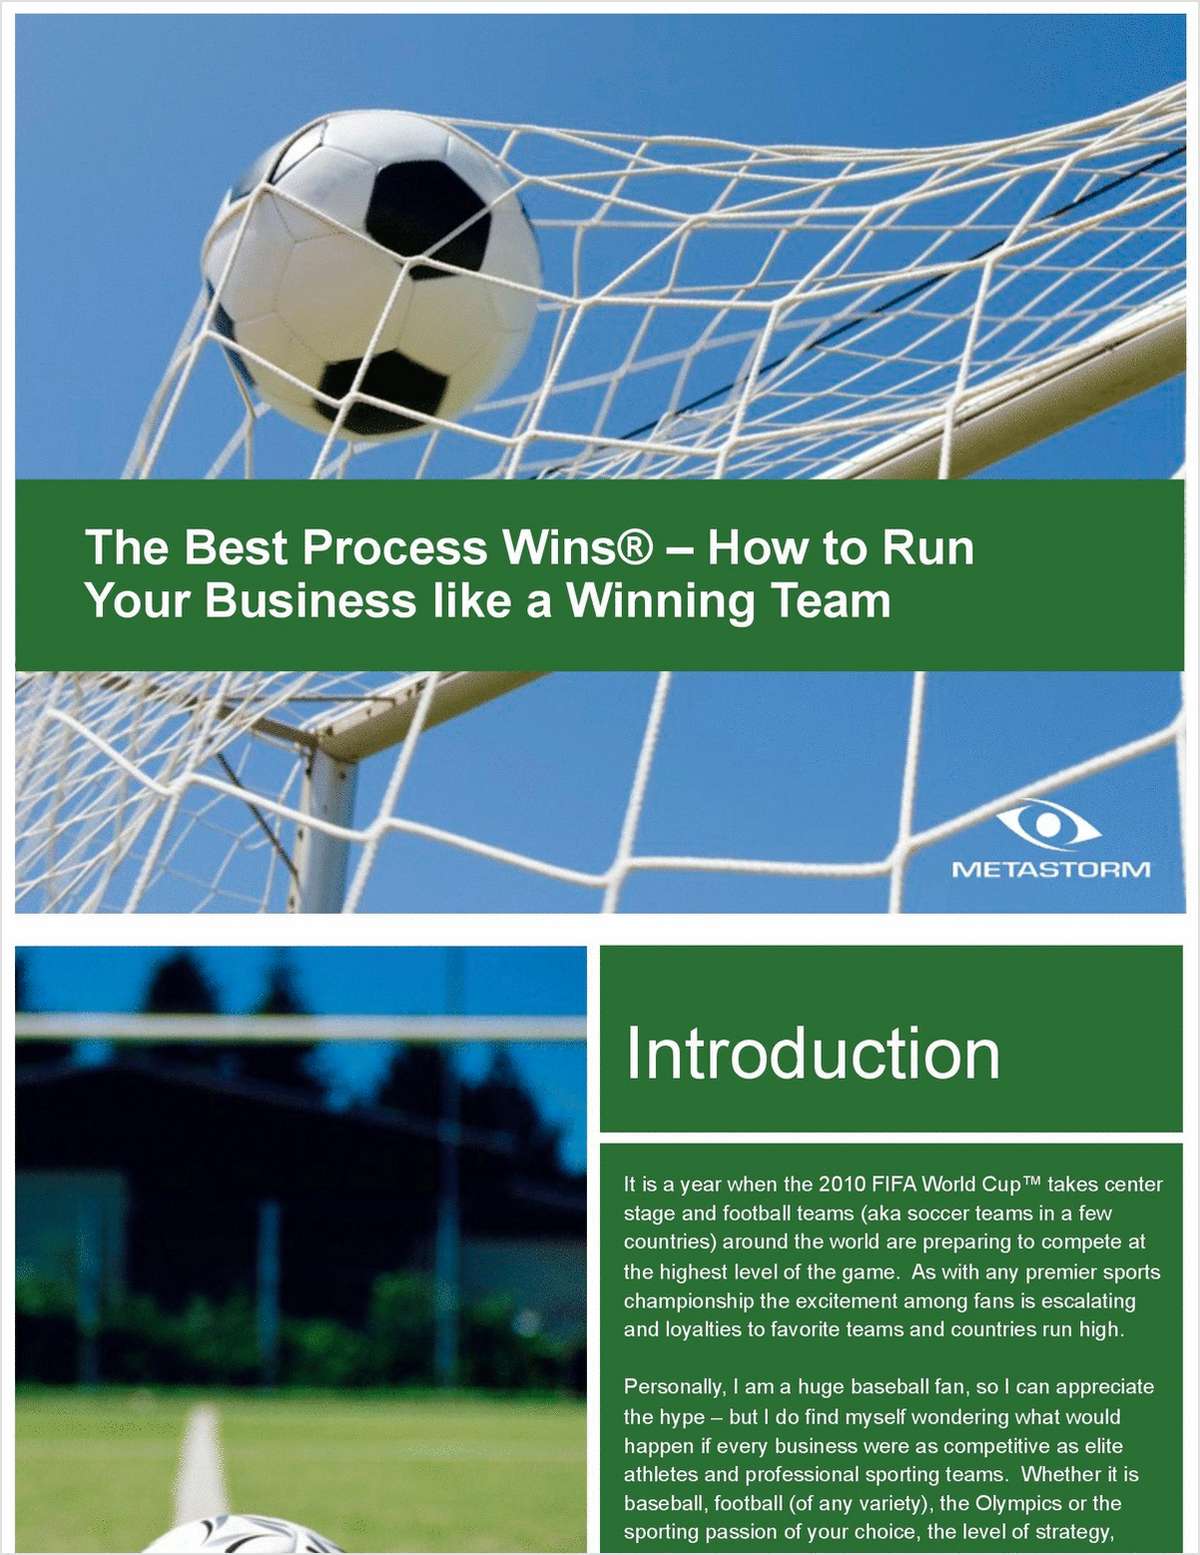 The Best Process Wins® – How to Run Your Business like a Winning Team